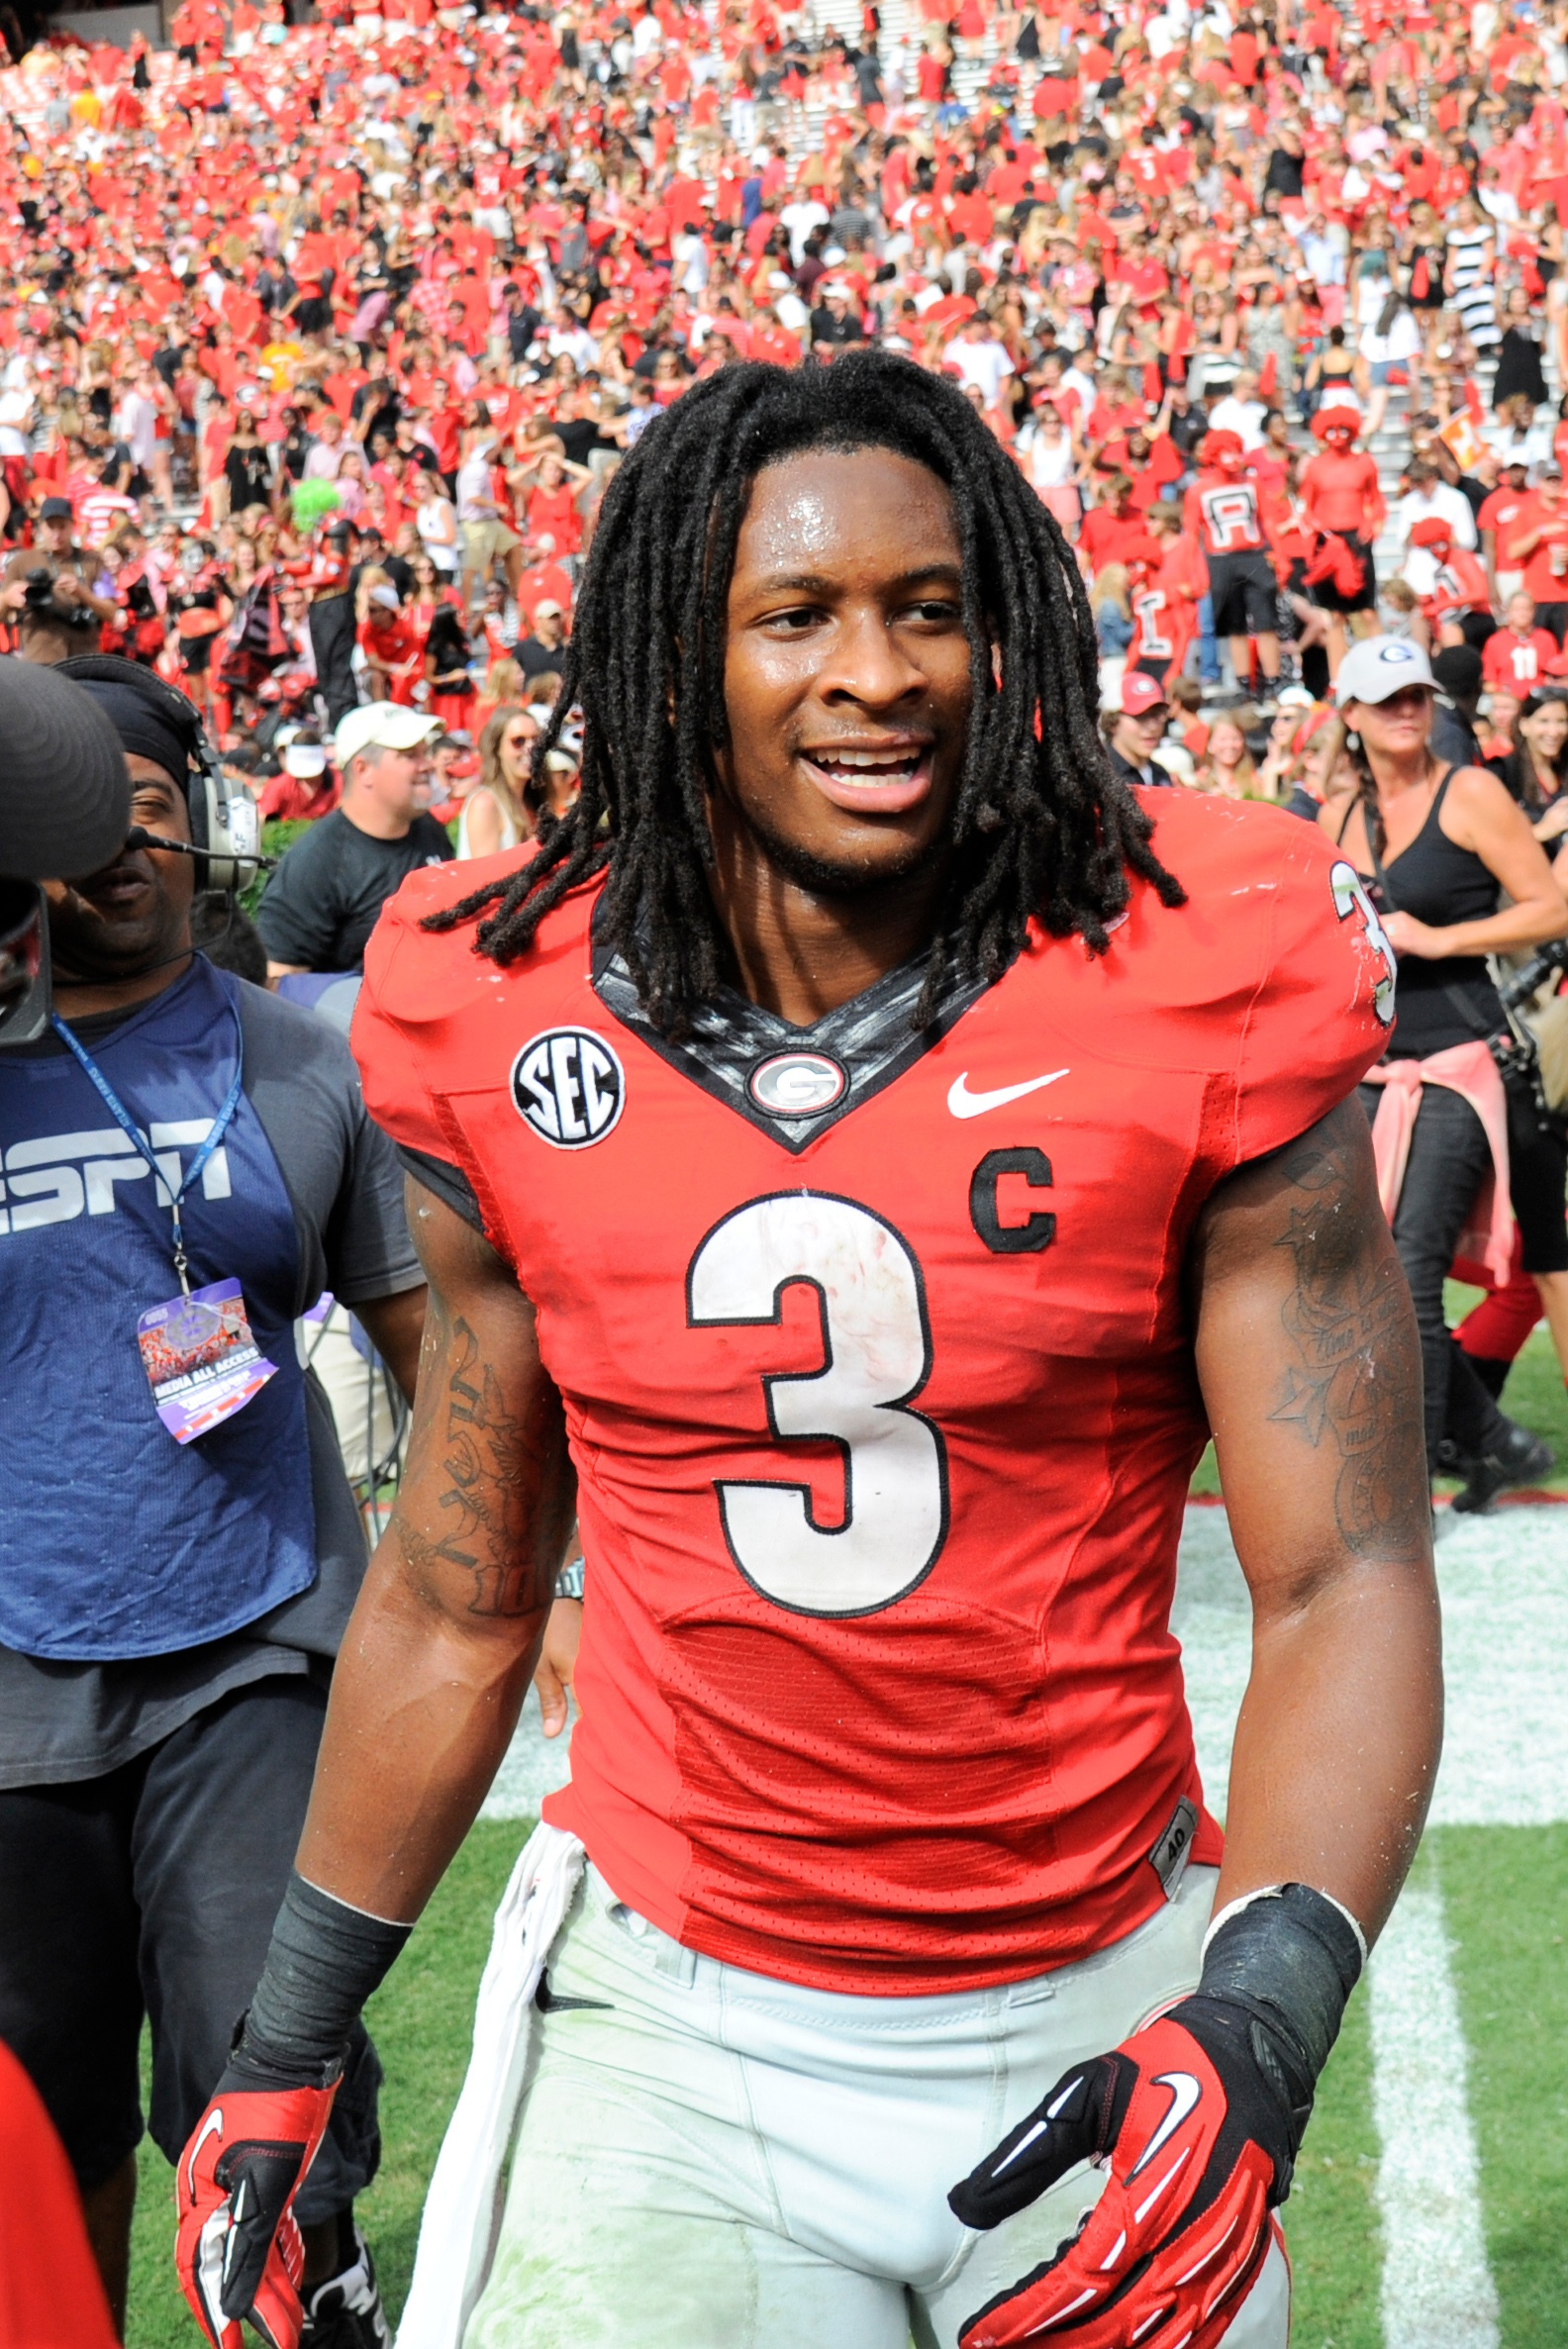 Todd Gurley reveals mindset after not playing in the NFL last